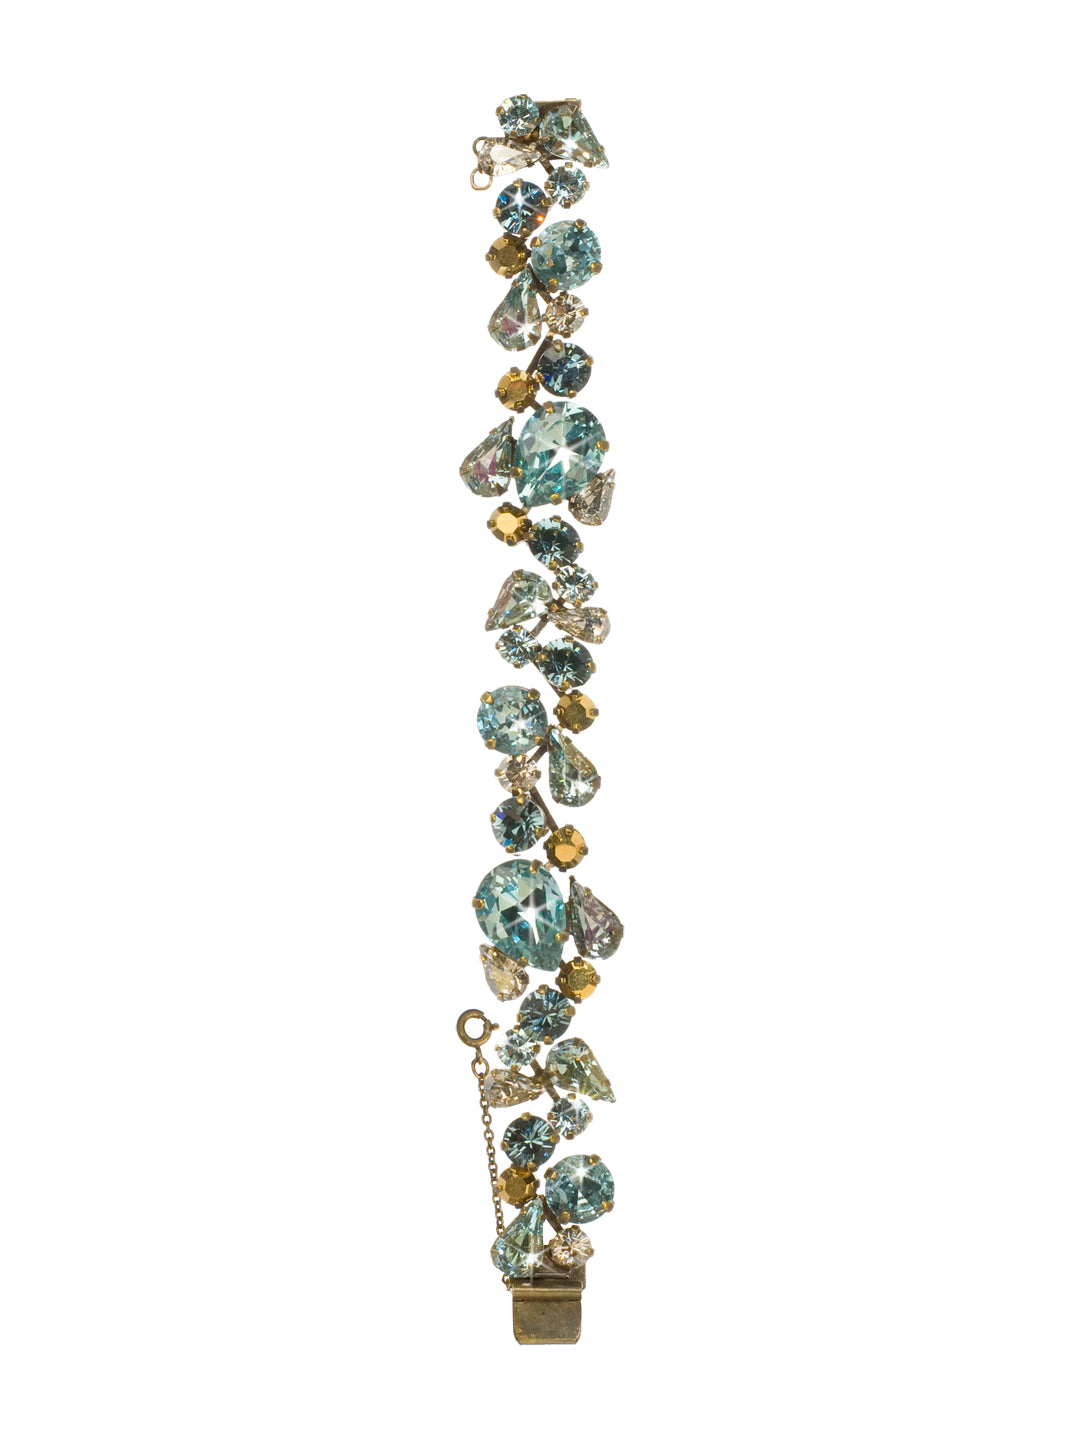 Teardrop Crystal Cluster Line Bracelet Tennis Bracelet - BCP3AGAFG - This bracelet pairs gorgeous, large teardrop crystals with smaller stones to create an off-the-wall patterned look. Enjoy the way this piece allows you to stand out, while giving off an elegant vibe. From Sorrelli's Afterglow collection in our Antique Gold-tone finish.